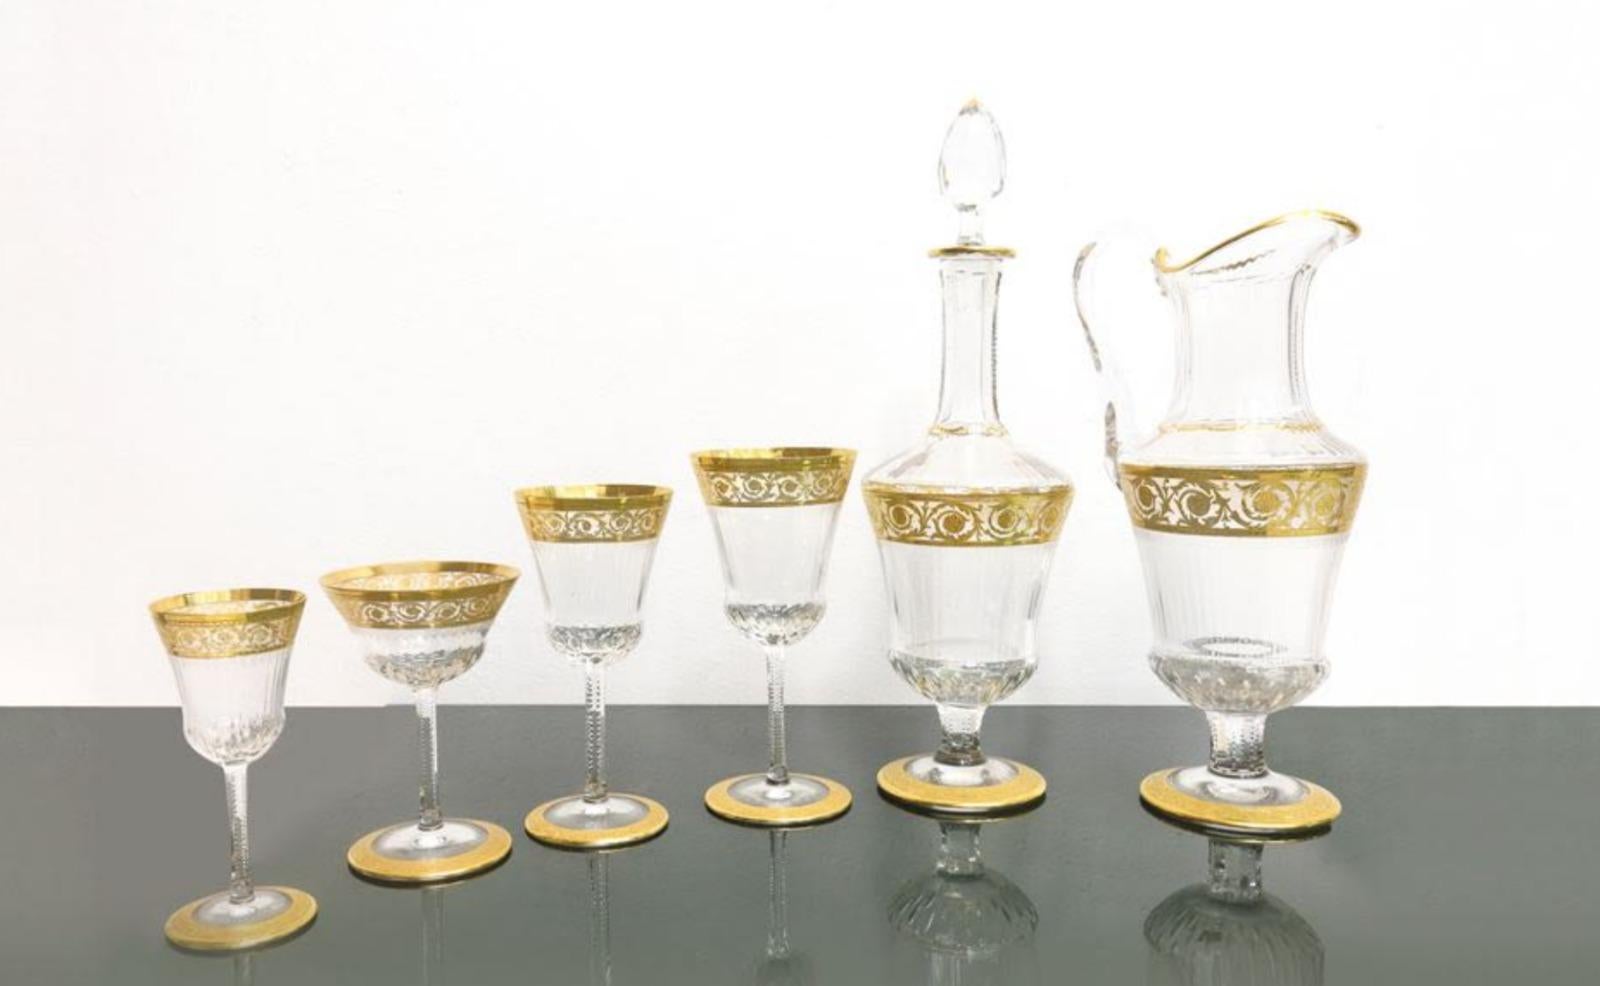 Amazing Saint Louis (Francia, 1586) - Set of 48 glasses and bottles, 'THISTLE GOLD' 
decoration, 20th century
12 water glasses,
12 wine glasses, 
12 goblets, 
12 liqueur, 
2 carafes and 2 wine bottles
very good condition
Total: 50 pieces 
